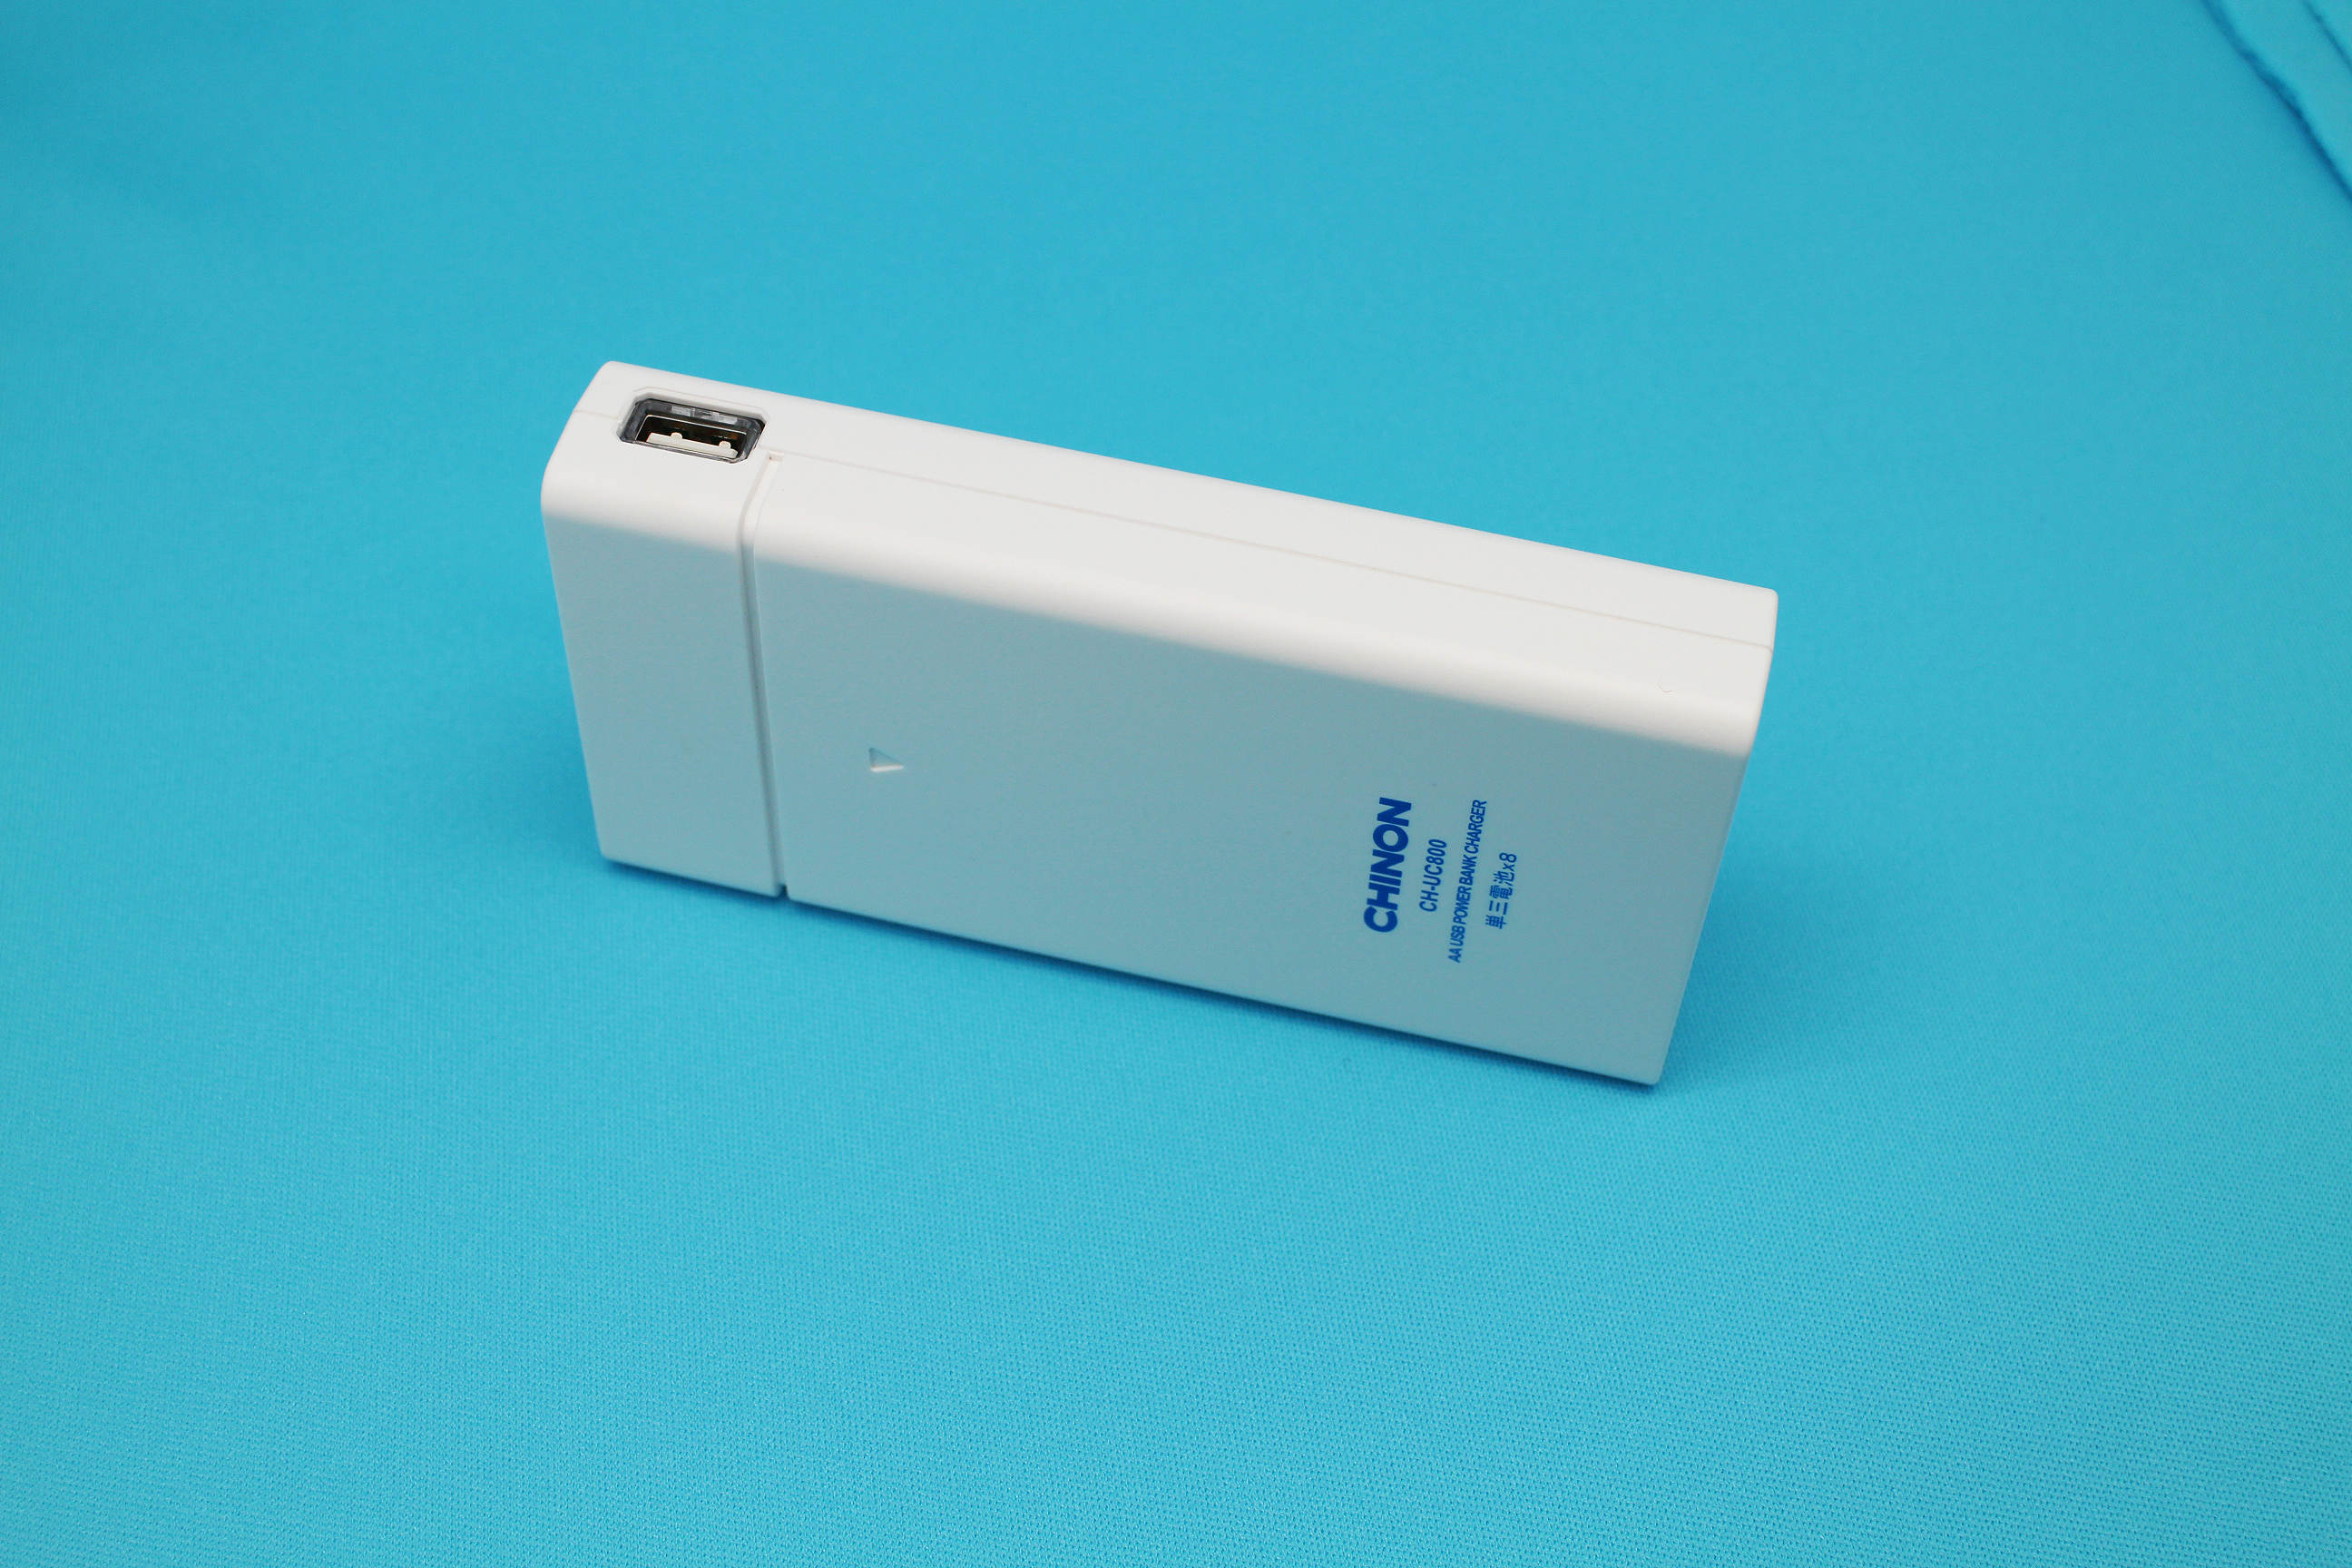 CHION-uc800 Mobile Charger